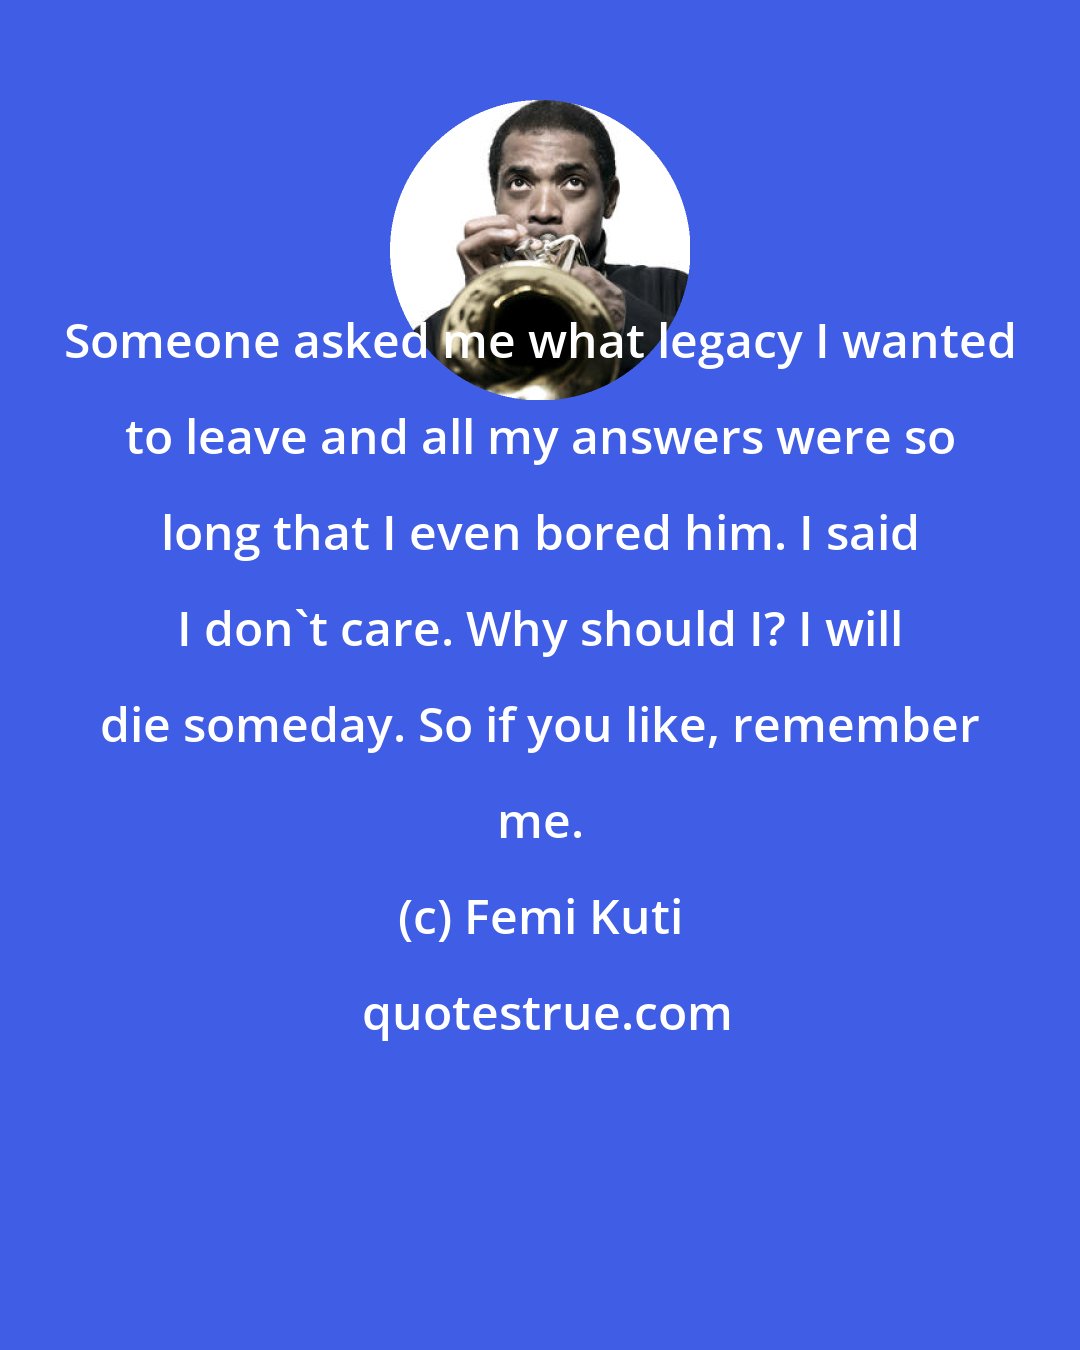 Femi Kuti: Someone asked me what legacy I wanted to leave and all my answers were so long that I even bored him. I said I don't care. Why should I? I will die someday. So if you like, remember me.